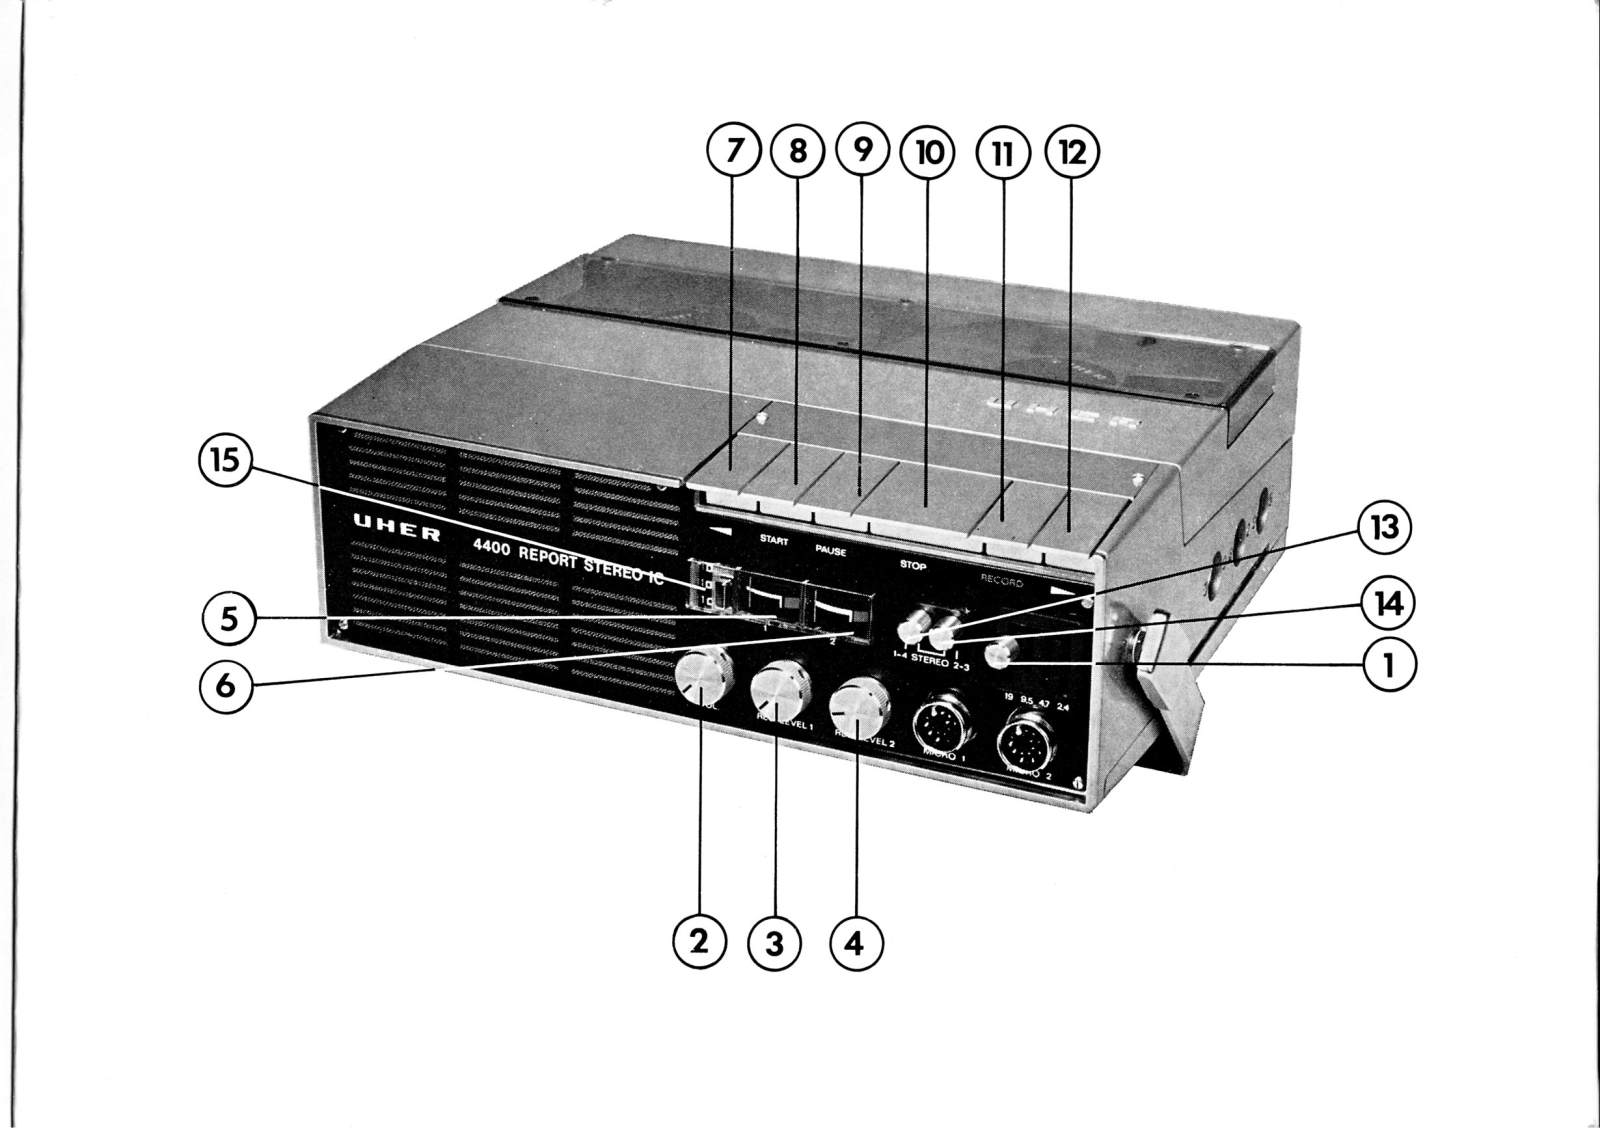 Uher 4200 Report Stereo IC Owners manual